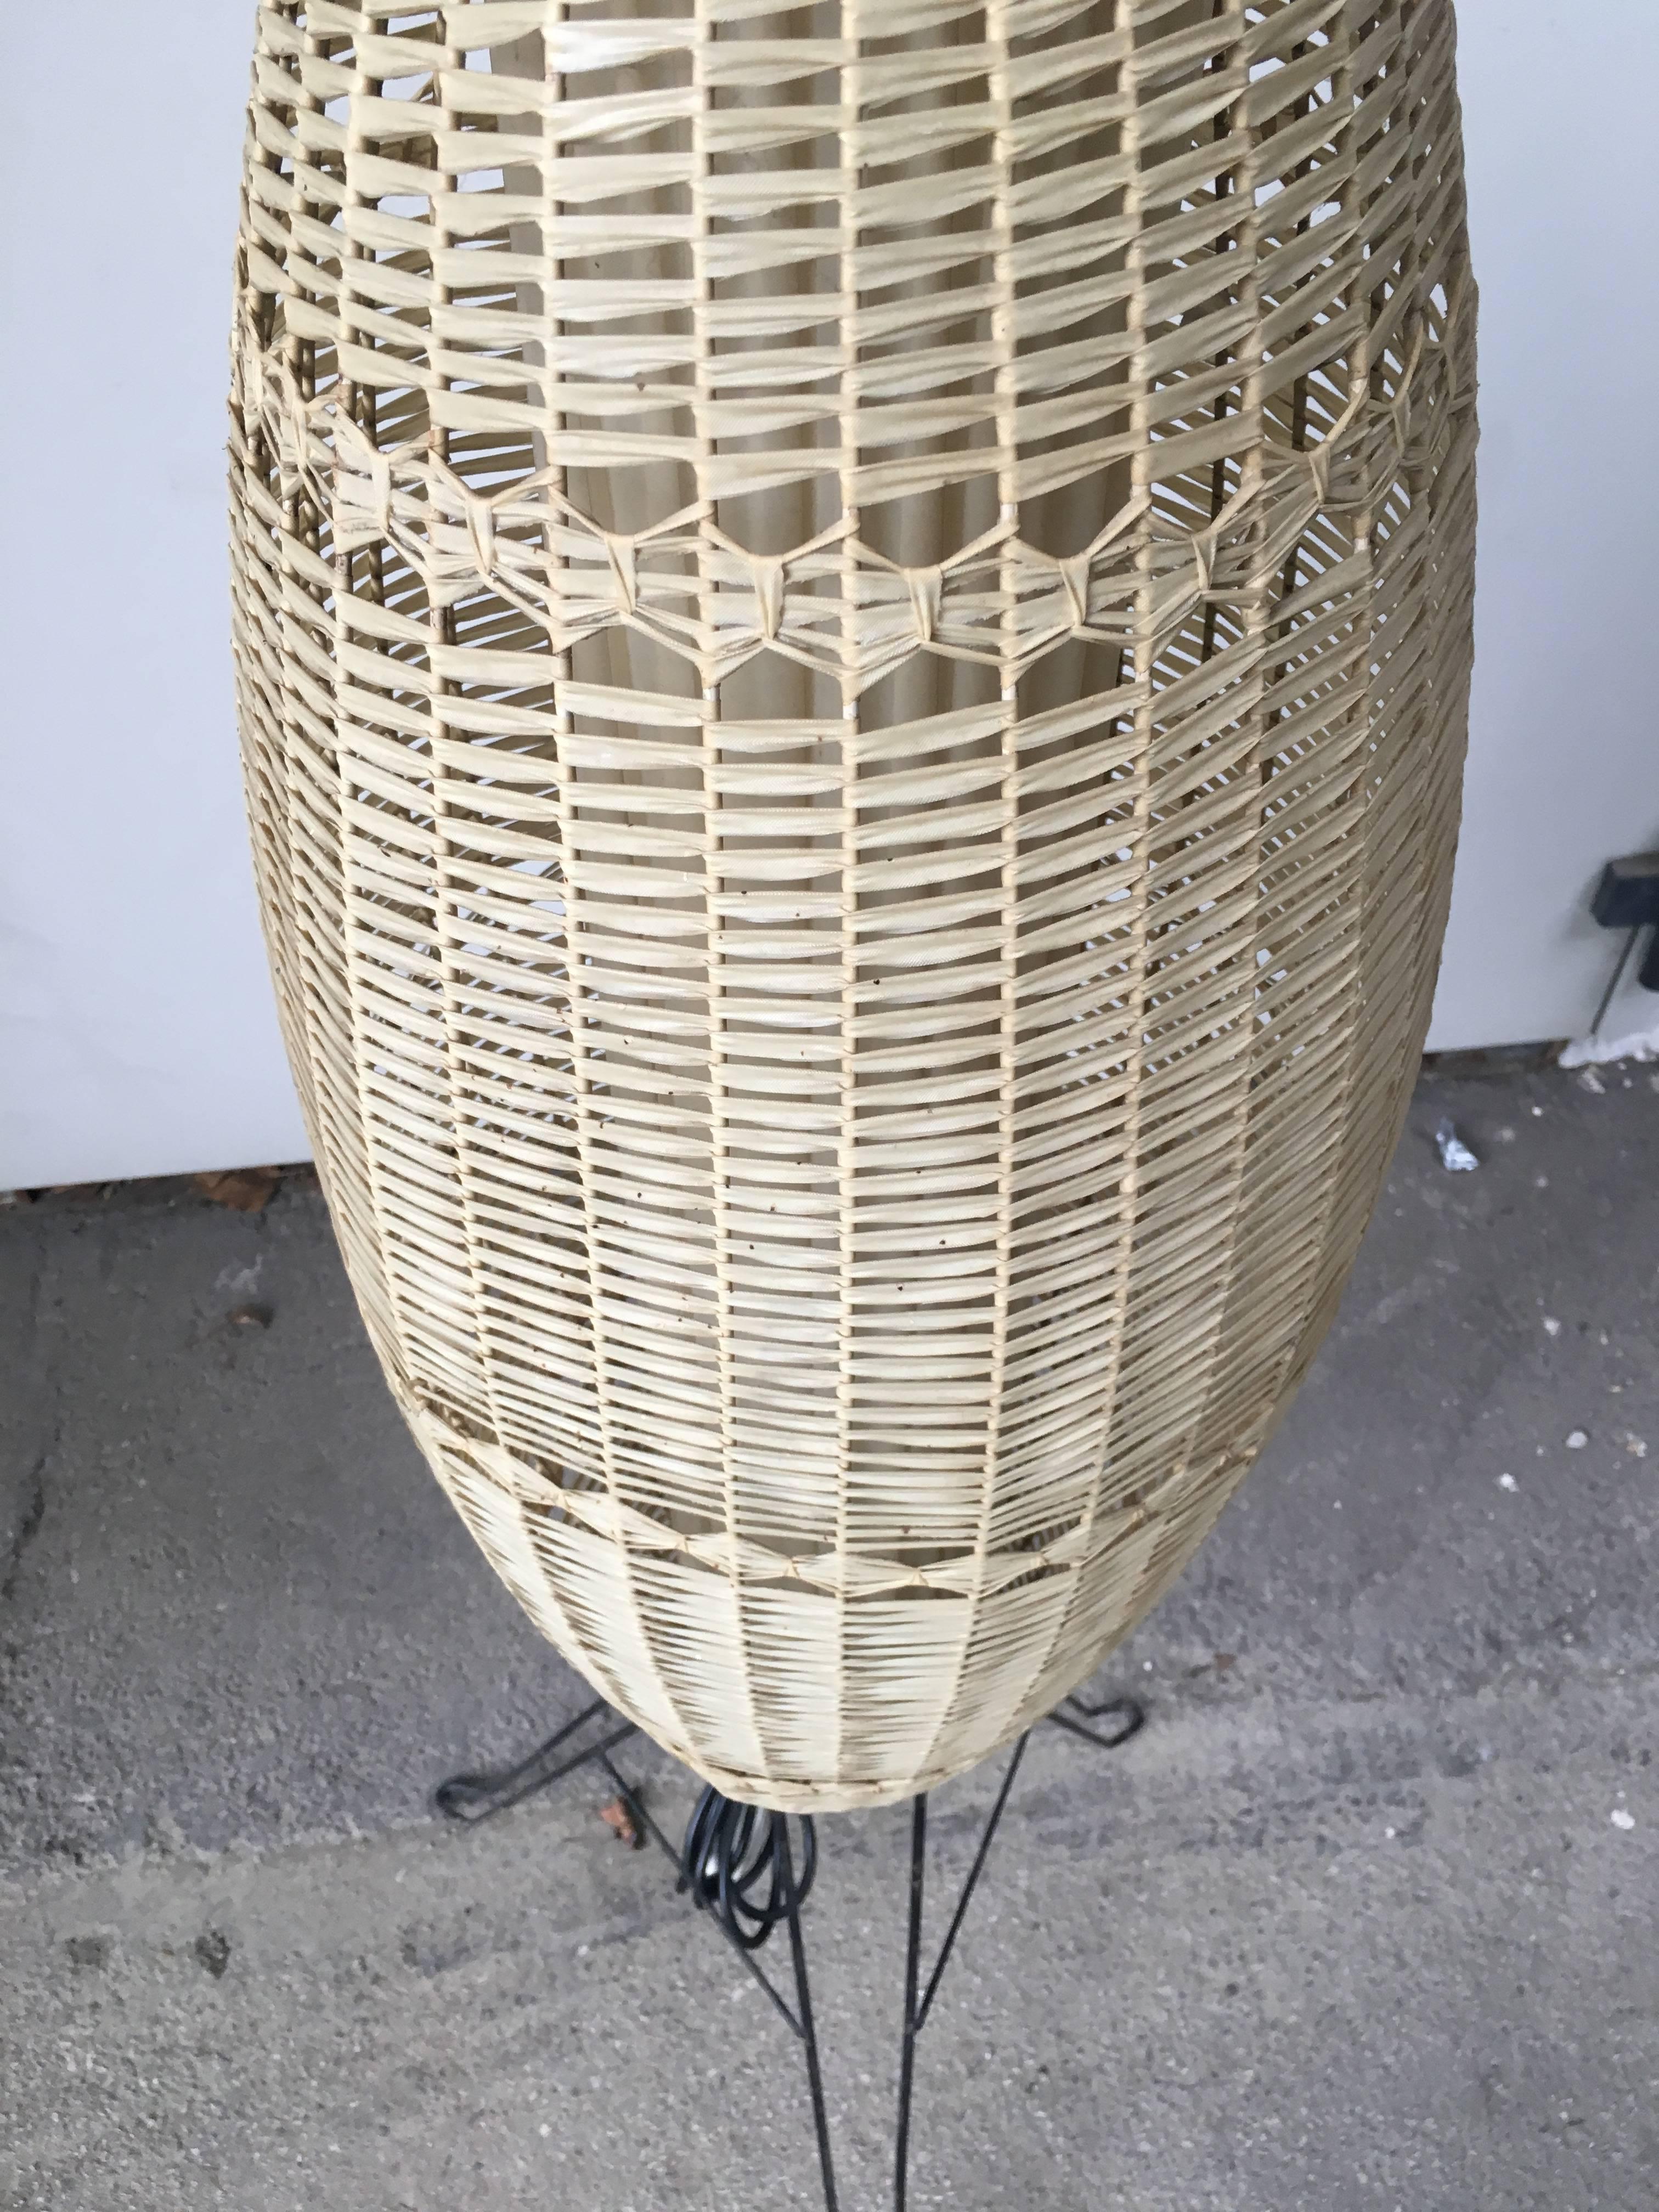 Mid-20th Century Italian Floor Lamp with Braided Tape from 1950s